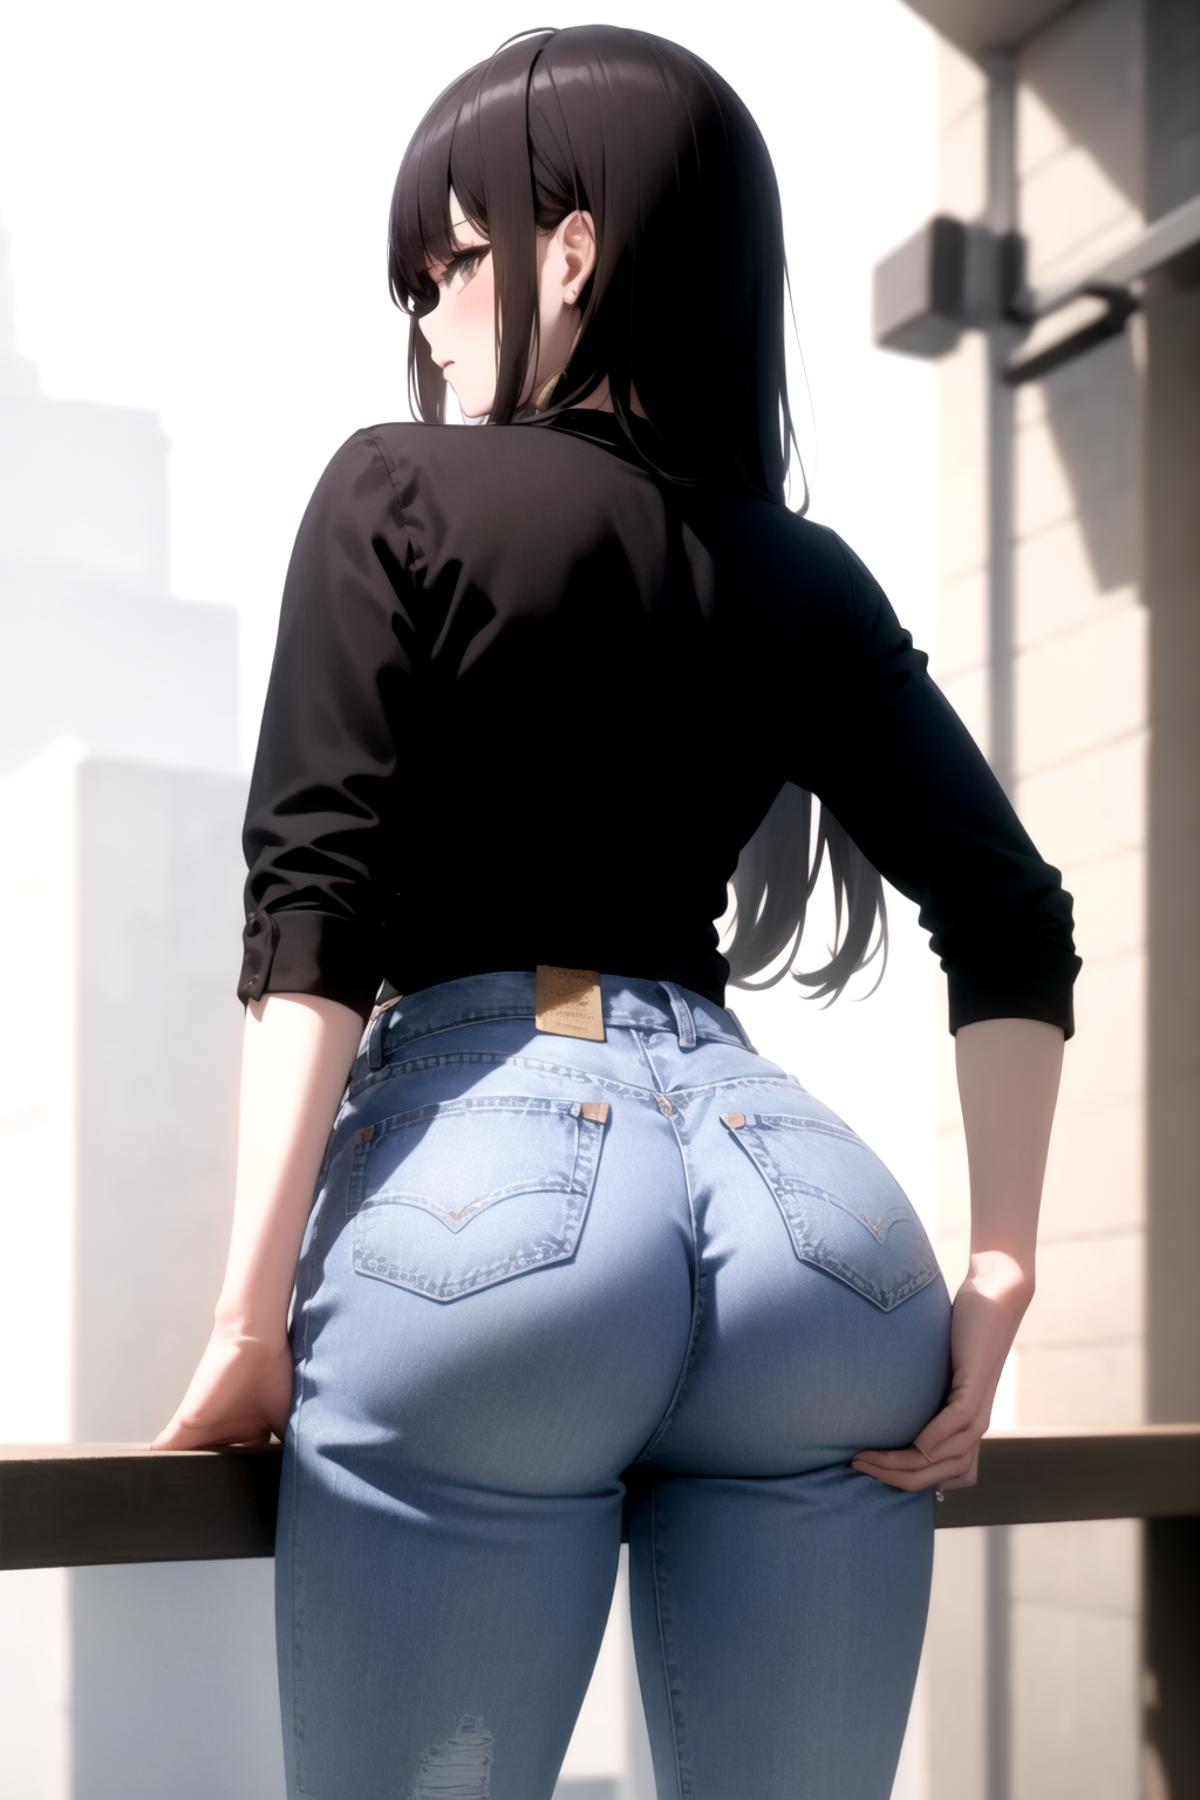 Ass support image by psoft